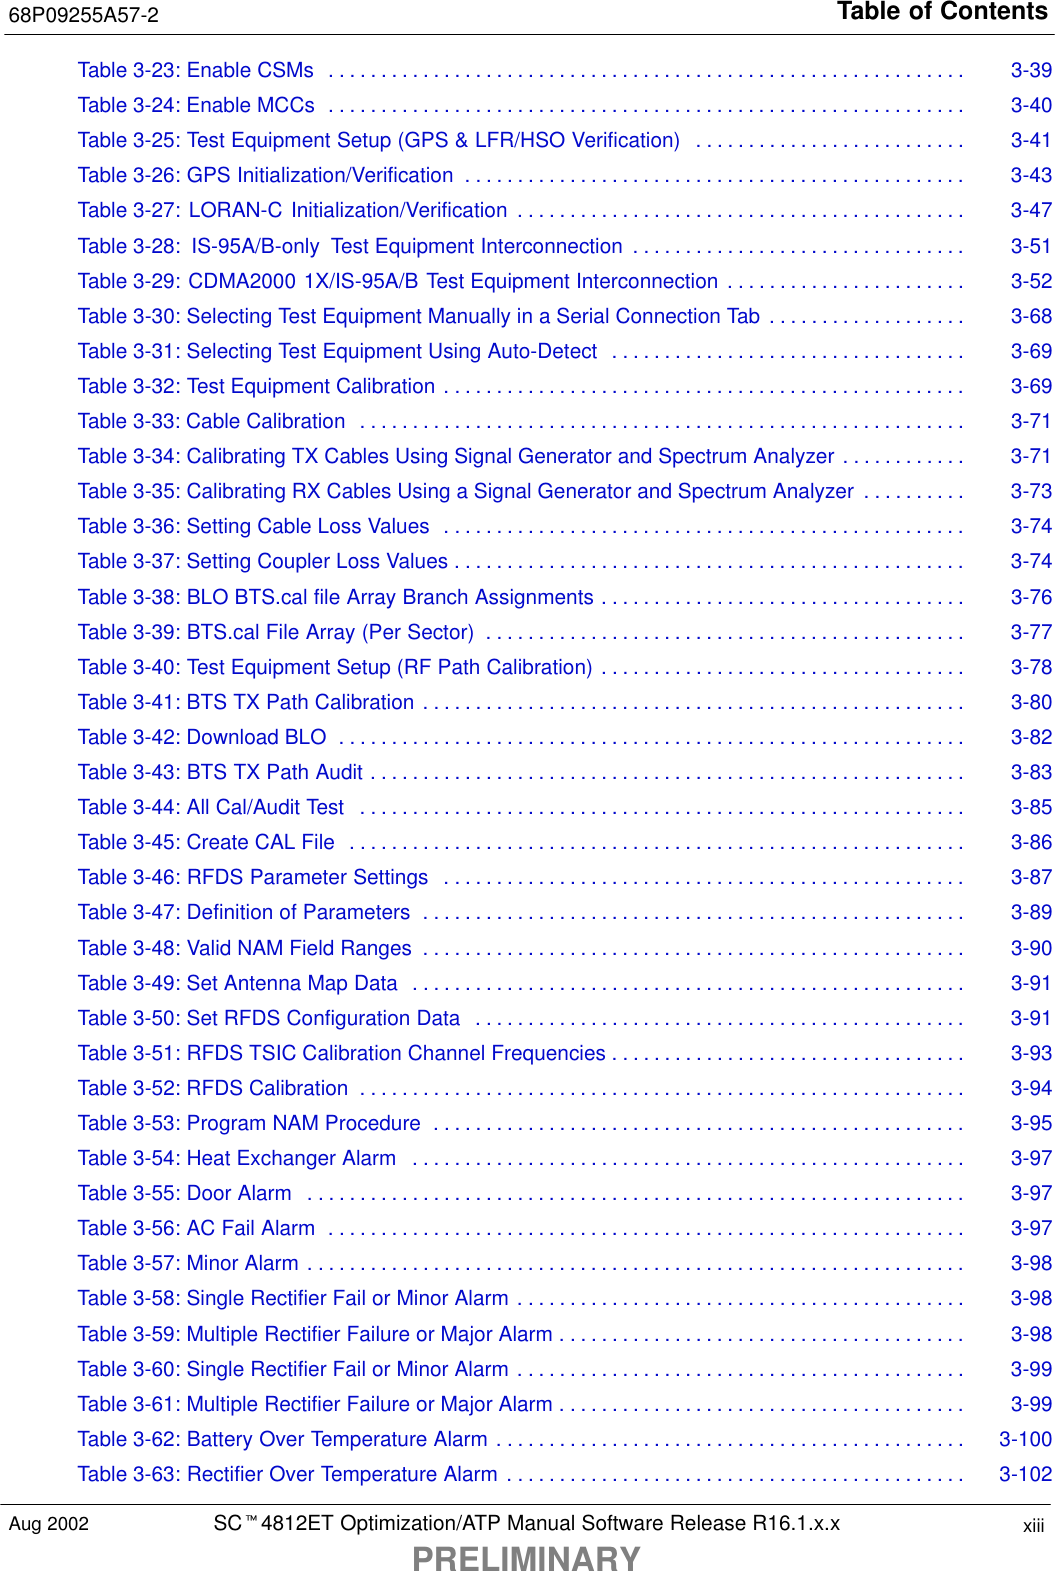 Table of Contents68P09255A57-2SCt4812ET Optimization/ATP Manual Software Release R16.1.x.xPRELIMINARYxiiiAug 2002Table 3-23: Enable CSMs 3-39. . . . . . . . . . . . . . . . . . . . . . . . . . . . . . . . . . . . . . . . . . . . . . . . . . . . . . . . . . . . . Table 3-24: Enable MCCs 3-40. . . . . . . . . . . . . . . . . . . . . . . . . . . . . . . . . . . . . . . . . . . . . . . . . . . . . . . . . . . . . Table 3-25: Test Equipment Setup (GPS &amp; LFR/HSO Verification) 3-41. . . . . . . . . . . . . . . . . . . . . . . . . . Table 3-26: GPS Initialization/Verification 3-43. . . . . . . . . . . . . . . . . . . . . . . . . . . . . . . . . . . . . . . . . . . . . . . . Table 3-27: LORAN-C Initialization/Verification 3-47. . . . . . . . . . . . . . . . . . . . . . . . . . . . . . . . . . . . . . . . . . . Table 3-28: IS-95A/B-only Test Equipment Interconnection 3-51. . . . . . . . . . . . . . . . . . . . . . . . . . . . . . . . Table 3-29: CDMA2000 1X/IS-95A/B Test Equipment Interconnection 3-52. . . . . . . . . . . . . . . . . . . . . . . Table 3-30: Selecting Test Equipment Manually in a Serial Connection Tab 3-68. . . . . . . . . . . . . . . . . . . Table 3-31: Selecting Test Equipment Using Auto-Detect 3-69. . . . . . . . . . . . . . . . . . . . . . . . . . . . . . . . . . Table 3-32: Test Equipment Calibration 3-69. . . . . . . . . . . . . . . . . . . . . . . . . . . . . . . . . . . . . . . . . . . . . . . . . . Table 3-33: Cable Calibration 3-71. . . . . . . . . . . . . . . . . . . . . . . . . . . . . . . . . . . . . . . . . . . . . . . . . . . . . . . . . . Table 3-34: Calibrating TX Cables Using Signal Generator and Spectrum Analyzer 3-71. . . . . . . . . . . . Table 3-35: Calibrating RX Cables Using a Signal Generator and Spectrum Analyzer 3-73. . . . . . . . . . Table 3-36: Setting Cable Loss Values 3-74. . . . . . . . . . . . . . . . . . . . . . . . . . . . . . . . . . . . . . . . . . . . . . . . . . Table 3-37: Setting Coupler Loss Values 3-74. . . . . . . . . . . . . . . . . . . . . . . . . . . . . . . . . . . . . . . . . . . . . . . . . Table 3-38: BLO BTS.cal file Array Branch Assignments 3-76. . . . . . . . . . . . . . . . . . . . . . . . . . . . . . . . . . . Table 3-39: BTS.cal File Array (Per Sector) 3-77. . . . . . . . . . . . . . . . . . . . . . . . . . . . . . . . . . . . . . . . . . . . . . Table 3-40: Test Equipment Setup (RF Path Calibration) 3-78. . . . . . . . . . . . . . . . . . . . . . . . . . . . . . . . . . . Table 3-41: BTS TX Path Calibration 3-80. . . . . . . . . . . . . . . . . . . . . . . . . . . . . . . . . . . . . . . . . . . . . . . . . . . . Table 3-42: Download BLO 3-82. . . . . . . . . . . . . . . . . . . . . . . . . . . . . . . . . . . . . . . . . . . . . . . . . . . . . . . . . . . . Table 3-43: BTS TX Path Audit 3-83. . . . . . . . . . . . . . . . . . . . . . . . . . . . . . . . . . . . . . . . . . . . . . . . . . . . . . . . . Table 3-44: All Cal/Audit Test 3-85. . . . . . . . . . . . . . . . . . . . . . . . . . . . . . . . . . . . . . . . . . . . . . . . . . . . . . . . . . Table 3-45: Create CAL File 3-86. . . . . . . . . . . . . . . . . . . . . . . . . . . . . . . . . . . . . . . . . . . . . . . . . . . . . . . . . . . Table 3-46: RFDS Parameter Settings 3-87. . . . . . . . . . . . . . . . . . . . . . . . . . . . . . . . . . . . . . . . . . . . . . . . . . Table 3-47: Definition of Parameters 3-89. . . . . . . . . . . . . . . . . . . . . . . . . . . . . . . . . . . . . . . . . . . . . . . . . . . . Table 3-48: Valid NAM Field Ranges 3-90. . . . . . . . . . . . . . . . . . . . . . . . . . . . . . . . . . . . . . . . . . . . . . . . . . . . Table 3-49: Set Antenna Map Data 3-91. . . . . . . . . . . . . . . . . . . . . . . . . . . . . . . . . . . . . . . . . . . . . . . . . . . . . Table 3-50: Set RFDS Configuration Data 3-91. . . . . . . . . . . . . . . . . . . . . . . . . . . . . . . . . . . . . . . . . . . . . . . Table 3-51: RFDS TSIC Calibration Channel Frequencies 3-93. . . . . . . . . . . . . . . . . . . . . . . . . . . . . . . . . . Table 3-52: RFDS Calibration 3-94. . . . . . . . . . . . . . . . . . . . . . . . . . . . . . . . . . . . . . . . . . . . . . . . . . . . . . . . . . Table 3-53: Program NAM Procedure 3-95. . . . . . . . . . . . . . . . . . . . . . . . . . . . . . . . . . . . . . . . . . . . . . . . . . . Table 3-54: Heat Exchanger Alarm 3-97. . . . . . . . . . . . . . . . . . . . . . . . . . . . . . . . . . . . . . . . . . . . . . . . . . . . . Table 3-55: Door Alarm 3-97. . . . . . . . . . . . . . . . . . . . . . . . . . . . . . . . . . . . . . . . . . . . . . . . . . . . . . . . . . . . . . . Table 3-56: AC Fail Alarm 3-97. . . . . . . . . . . . . . . . . . . . . . . . . . . . . . . . . . . . . . . . . . . . . . . . . . . . . . . . . . . . . Table 3-57: Minor Alarm 3-98. . . . . . . . . . . . . . . . . . . . . . . . . . . . . . . . . . . . . . . . . . . . . . . . . . . . . . . . . . . . . . . Table 3-58: Single Rectifier Fail or Minor Alarm 3-98. . . . . . . . . . . . . . . . . . . . . . . . . . . . . . . . . . . . . . . . . . . Table 3-59: Multiple Rectifier Failure or Major Alarm 3-98. . . . . . . . . . . . . . . . . . . . . . . . . . . . . . . . . . . . . . . Table 3-60: Single Rectifier Fail or Minor Alarm 3-99. . . . . . . . . . . . . . . . . . . . . . . . . . . . . . . . . . . . . . . . . . . Table 3-61: Multiple Rectifier Failure or Major Alarm 3-99. . . . . . . . . . . . . . . . . . . . . . . . . . . . . . . . . . . . . . . Table 3-62: Battery Over Temperature Alarm 3-100. . . . . . . . . . . . . . . . . . . . . . . . . . . . . . . . . . . . . . . . . . . . . Table 3-63: Rectifier Over Temperature Alarm 3-102. . . . . . . . . . . . . . . . . . . . . . . . . . . . . . . . . . . . . . . . . . . . 